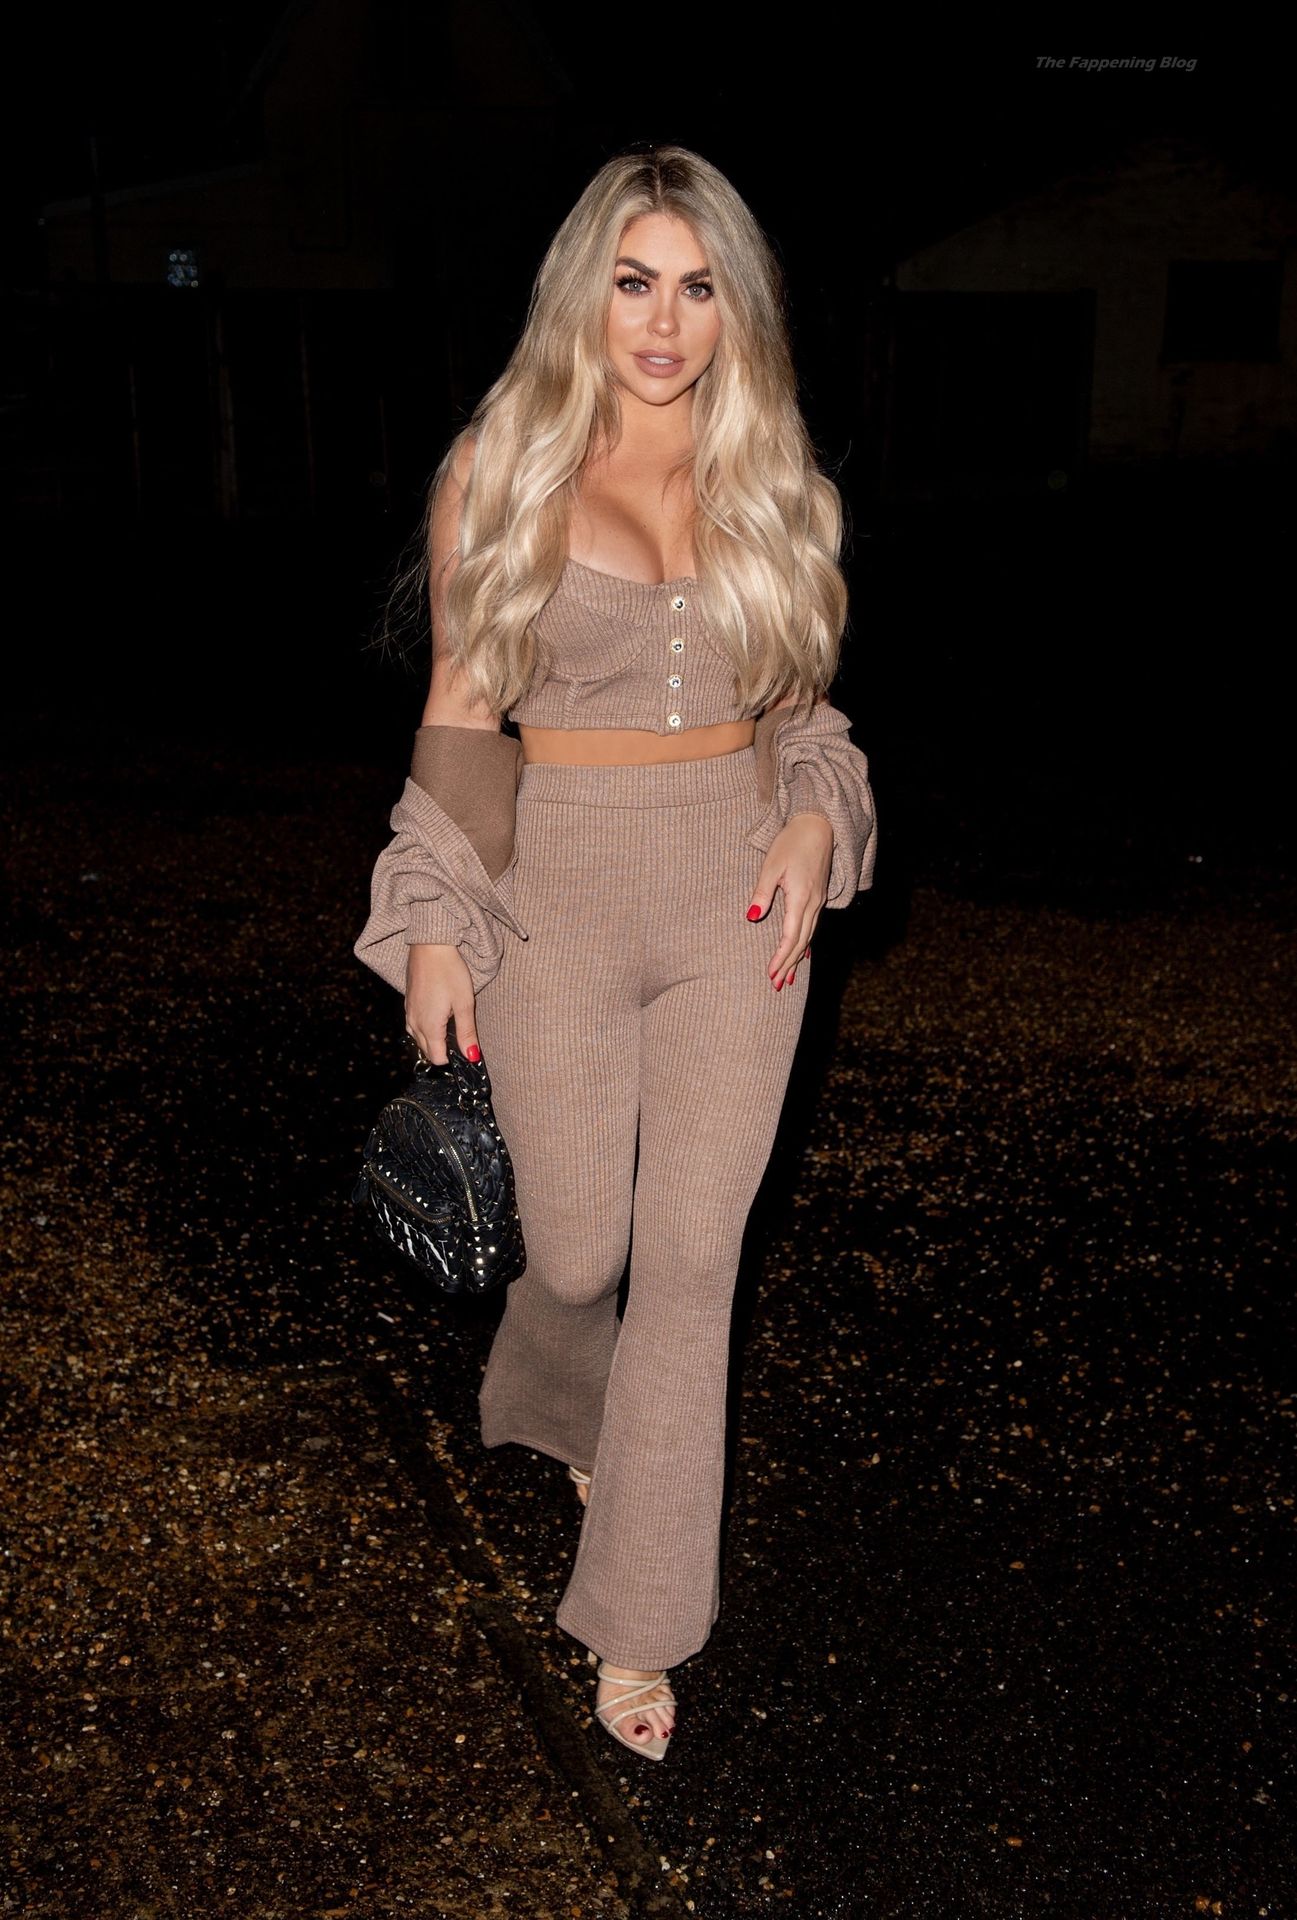 Bianca Gascoigne is Seen Leaving a Studio After a Photoshoot in London (13 Photos)